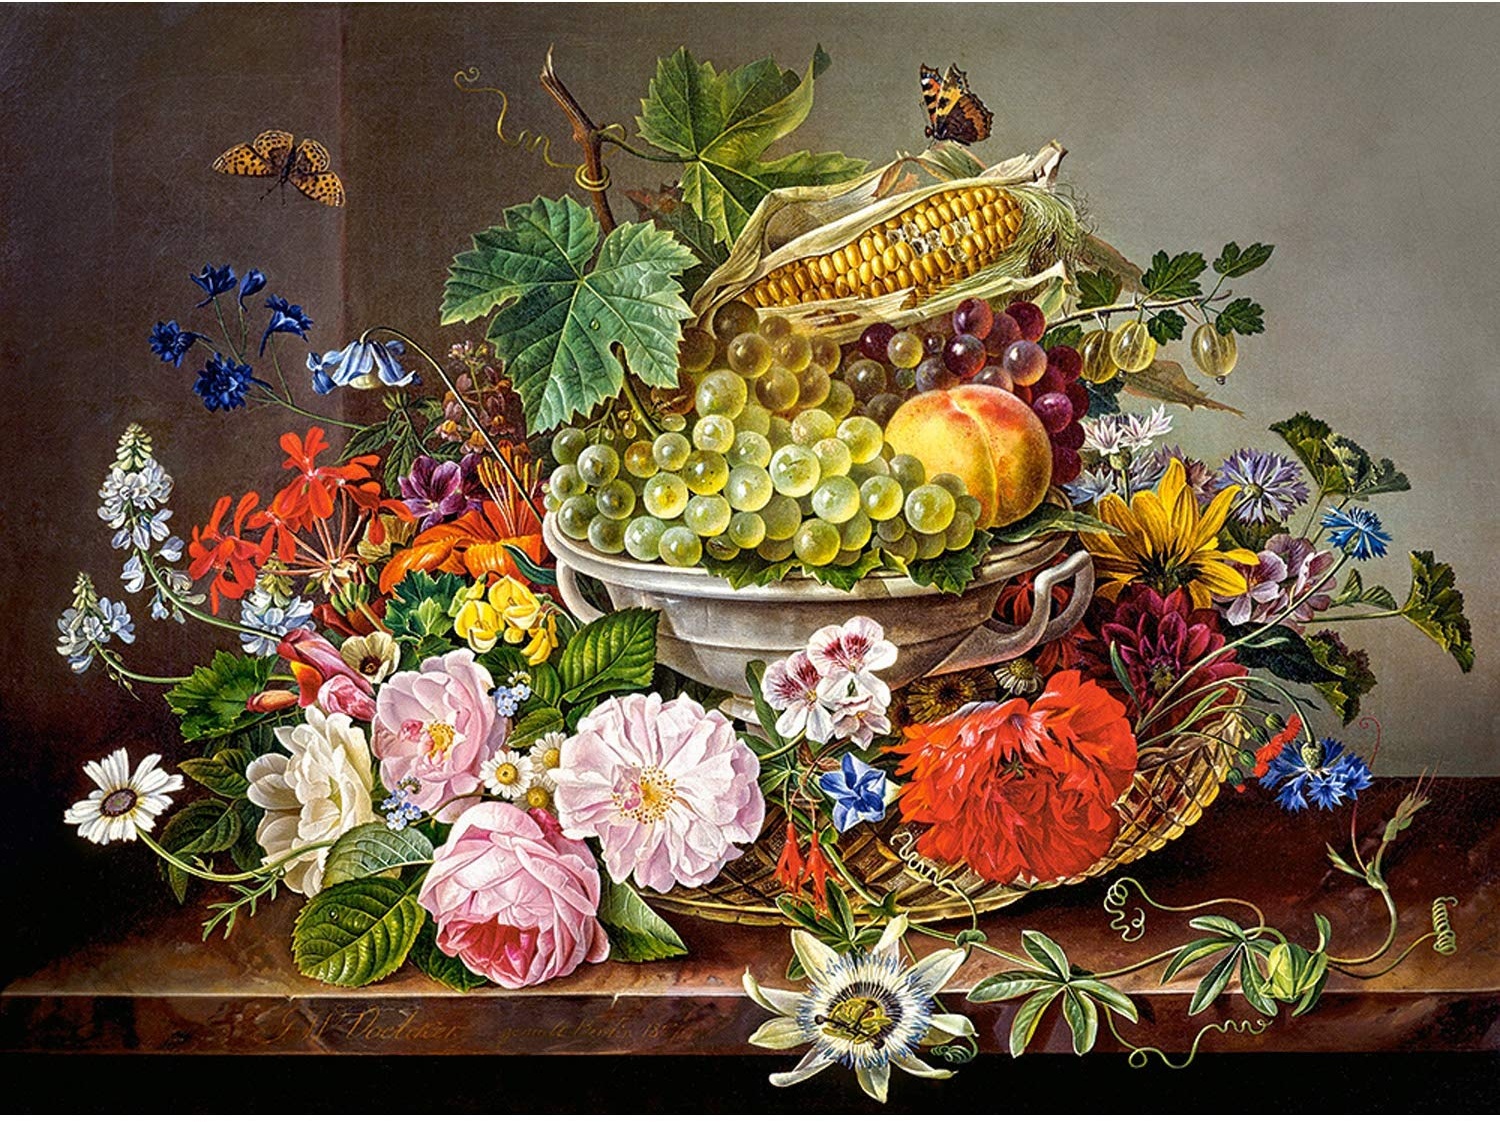 Castorland C-200658-2 Still Life with Flowers and Fruit Basket Puzzle 2000 Teile, bunt